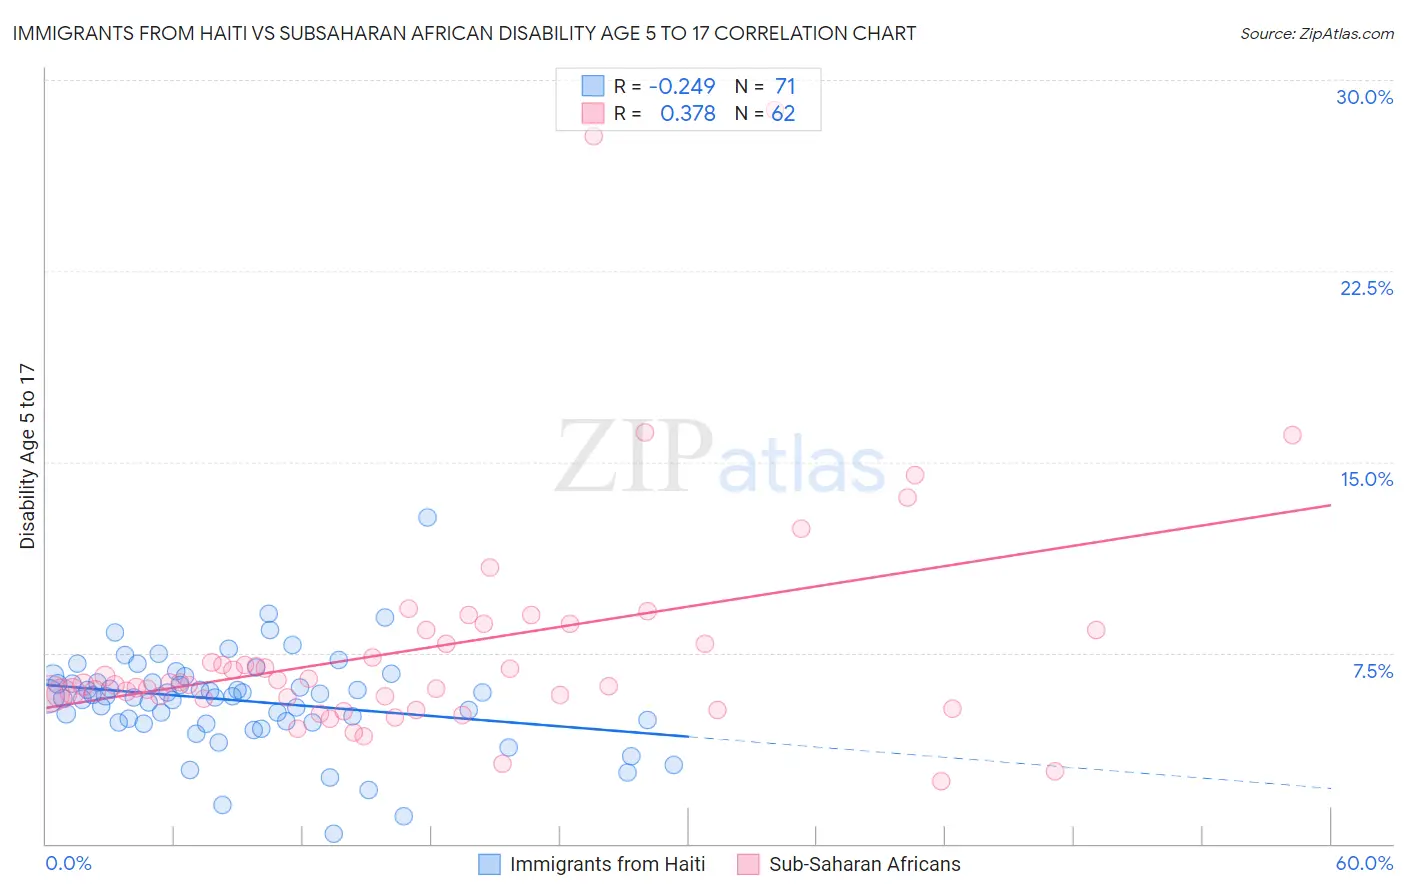 Immigrants from Haiti vs Subsaharan African Disability Age 5 to 17